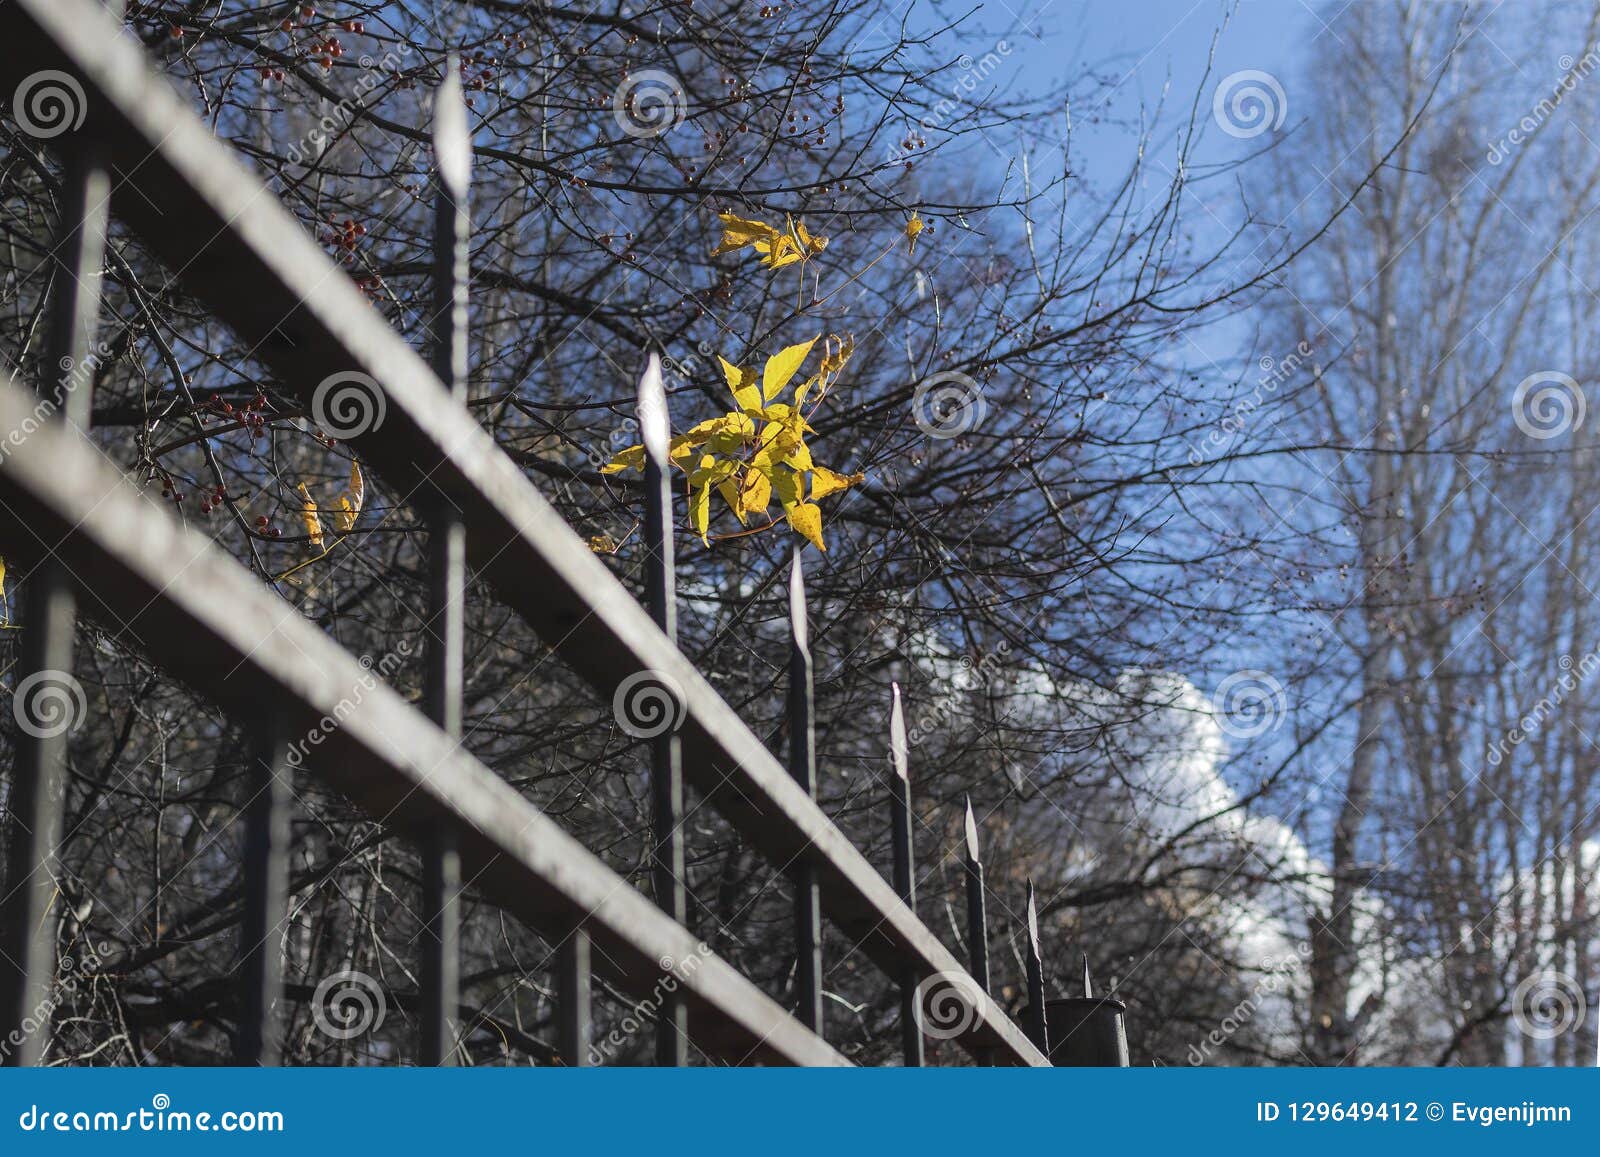 Yellow Sheet Above The Metal Fence. Stock Photo - Image of fence, iron ...
